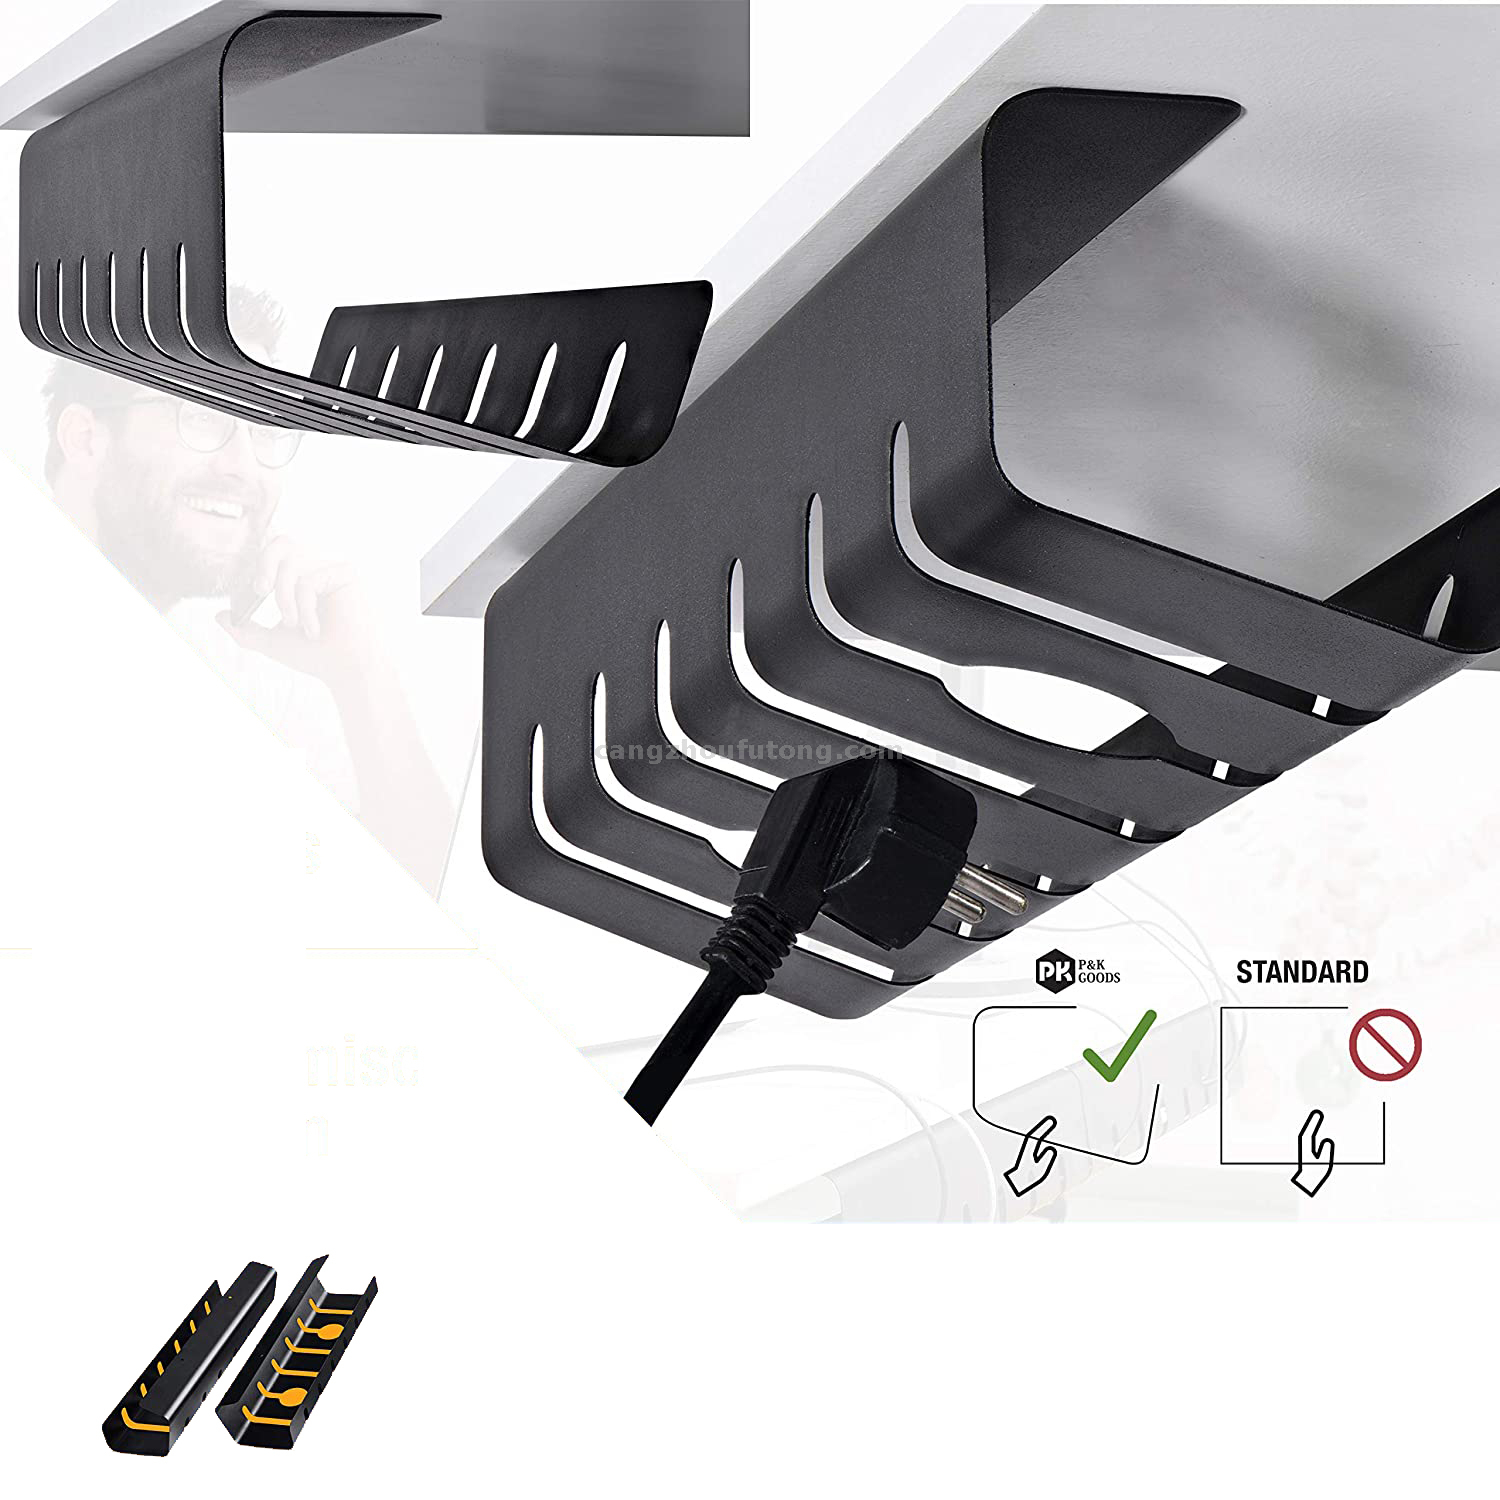 Under Desk Metal Network Cable Tray Computer Charger Electrical Wire Steel Management Trunking